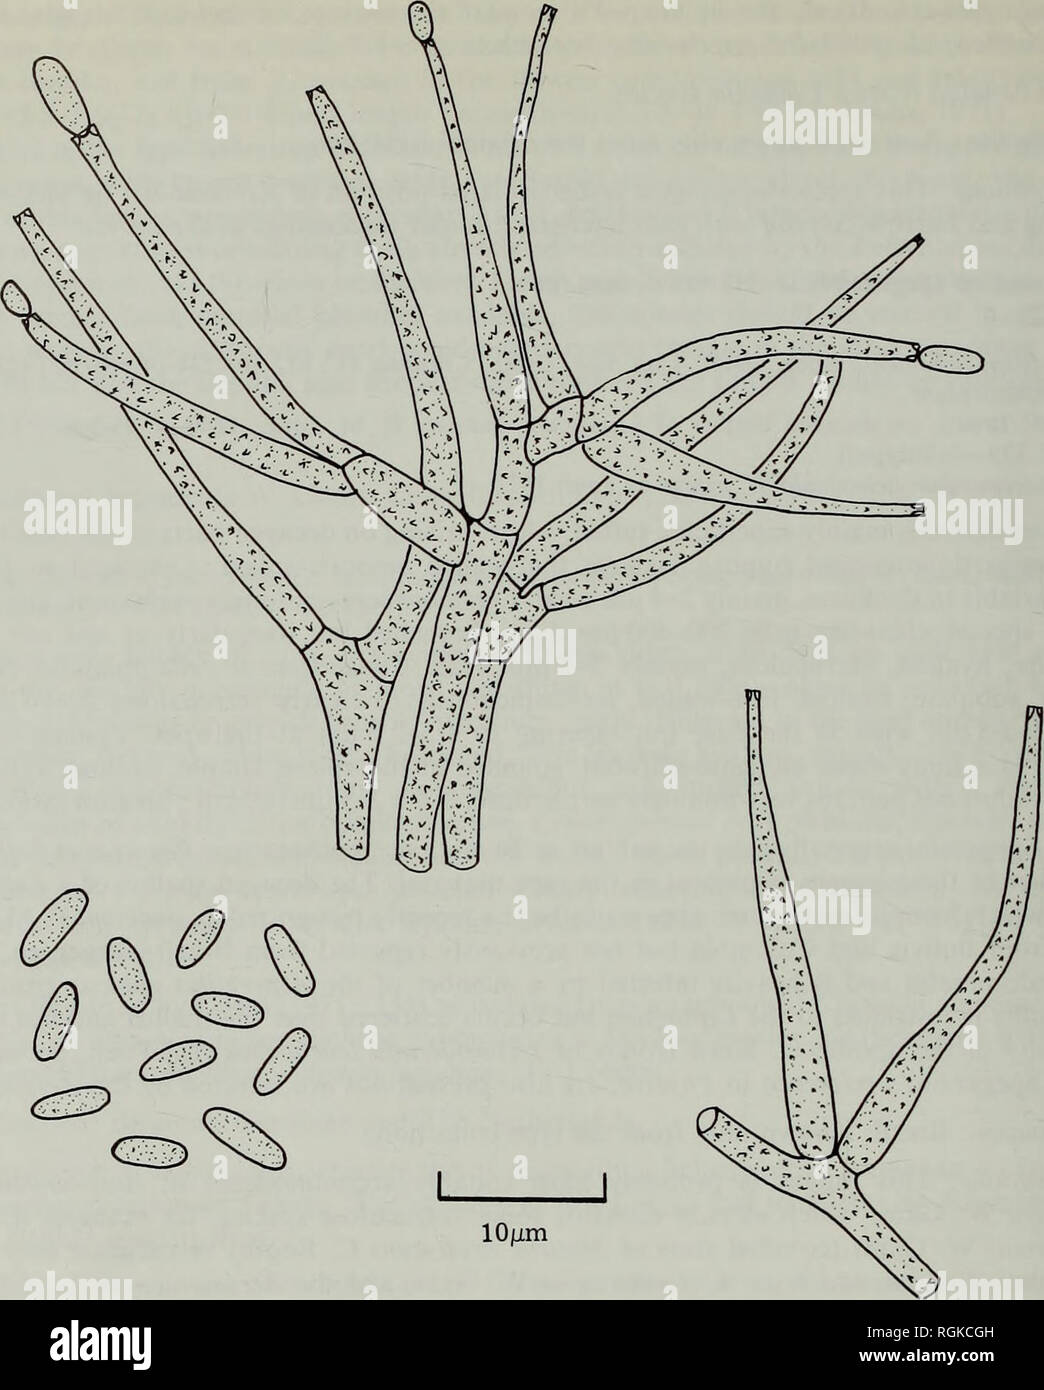 . Bulletin of the British Museum (Natural History) Botany. 196 D. L. HAWKSWORTH. Fig. 2 Acremonium spegazzinii (LPS 11.339—holotype). conidiogenous cell. Conidia catenate or sometimes solitary, dry, ellipsoid, obclavate, subcylindri- cal or lemoniform, brown to dark brown, non-septate or transversely septate. Type species: Ampullifera foliicola Deight. Perfect state: ? Teratoschaeta Bat. &amp; Fonseca; see under A. amoeboides. Number of species: Six species are accepted here, one of which is newly described. All occur as obligately lichenicolous fungi on foliicolous lichens with the possible e Stock Photo